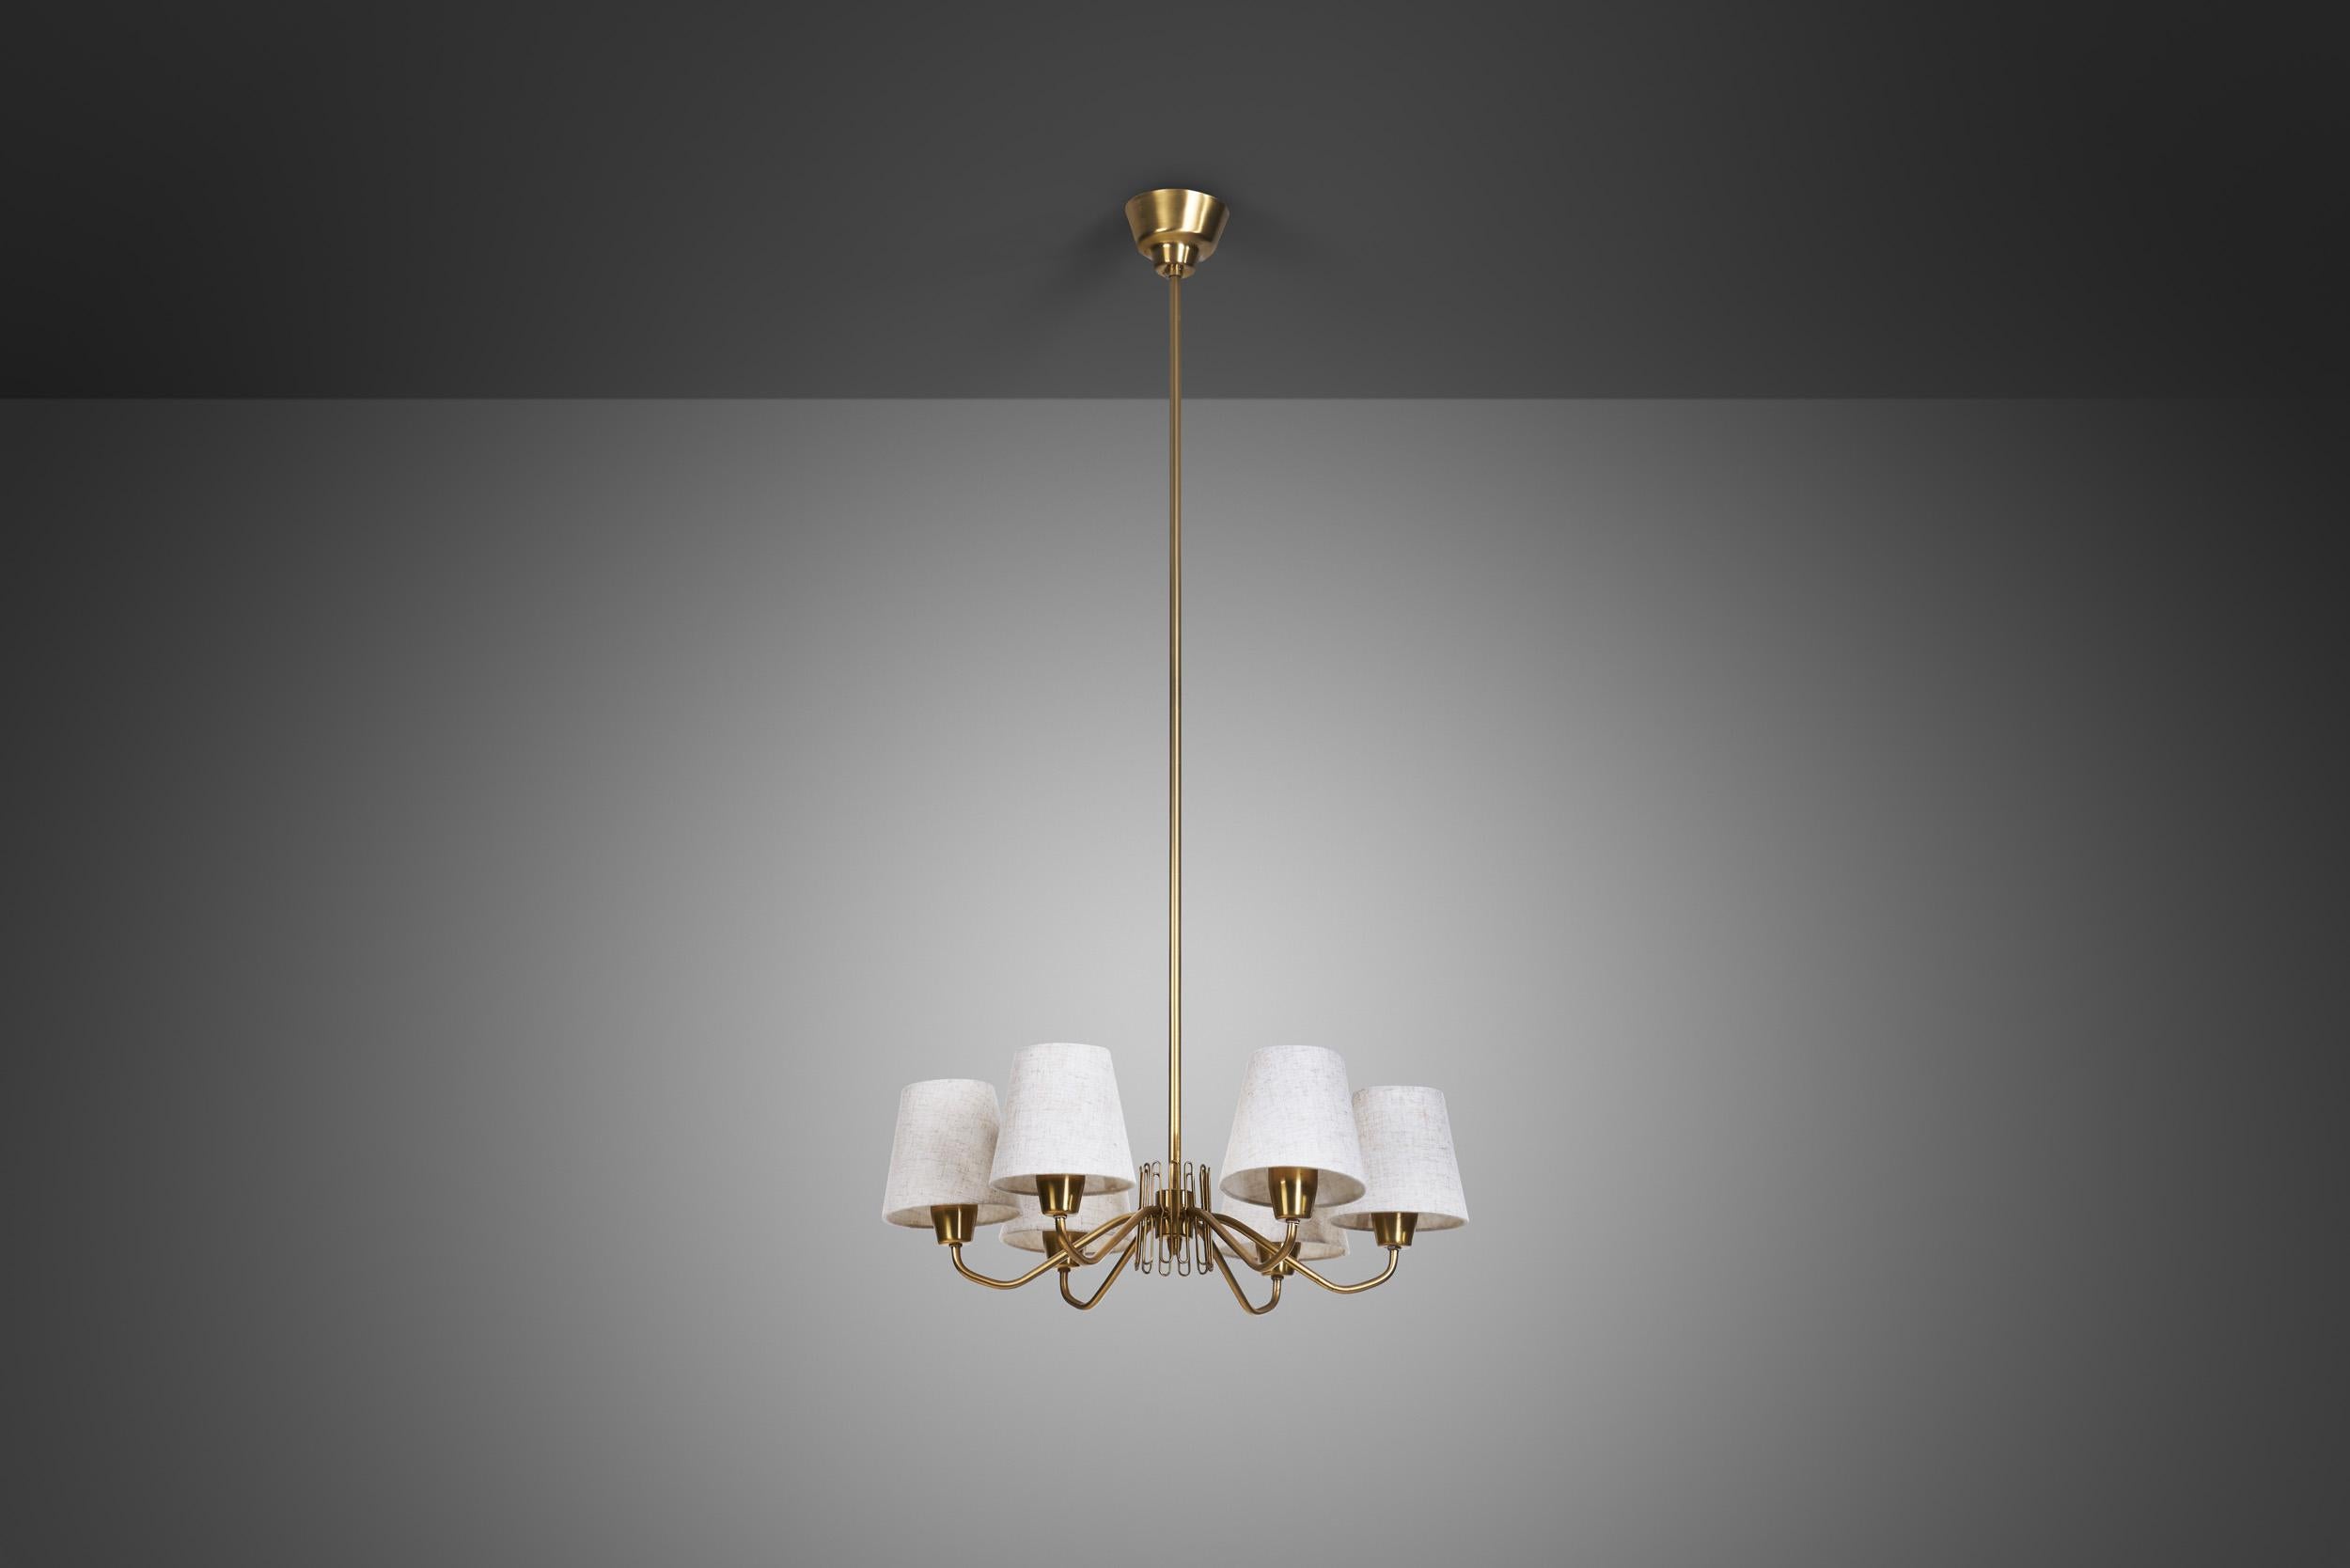 Mid-Century Modern Swedish Modern Brass Ceiling Light with Fabric Shades, Sweden Mid-20th Century For Sale